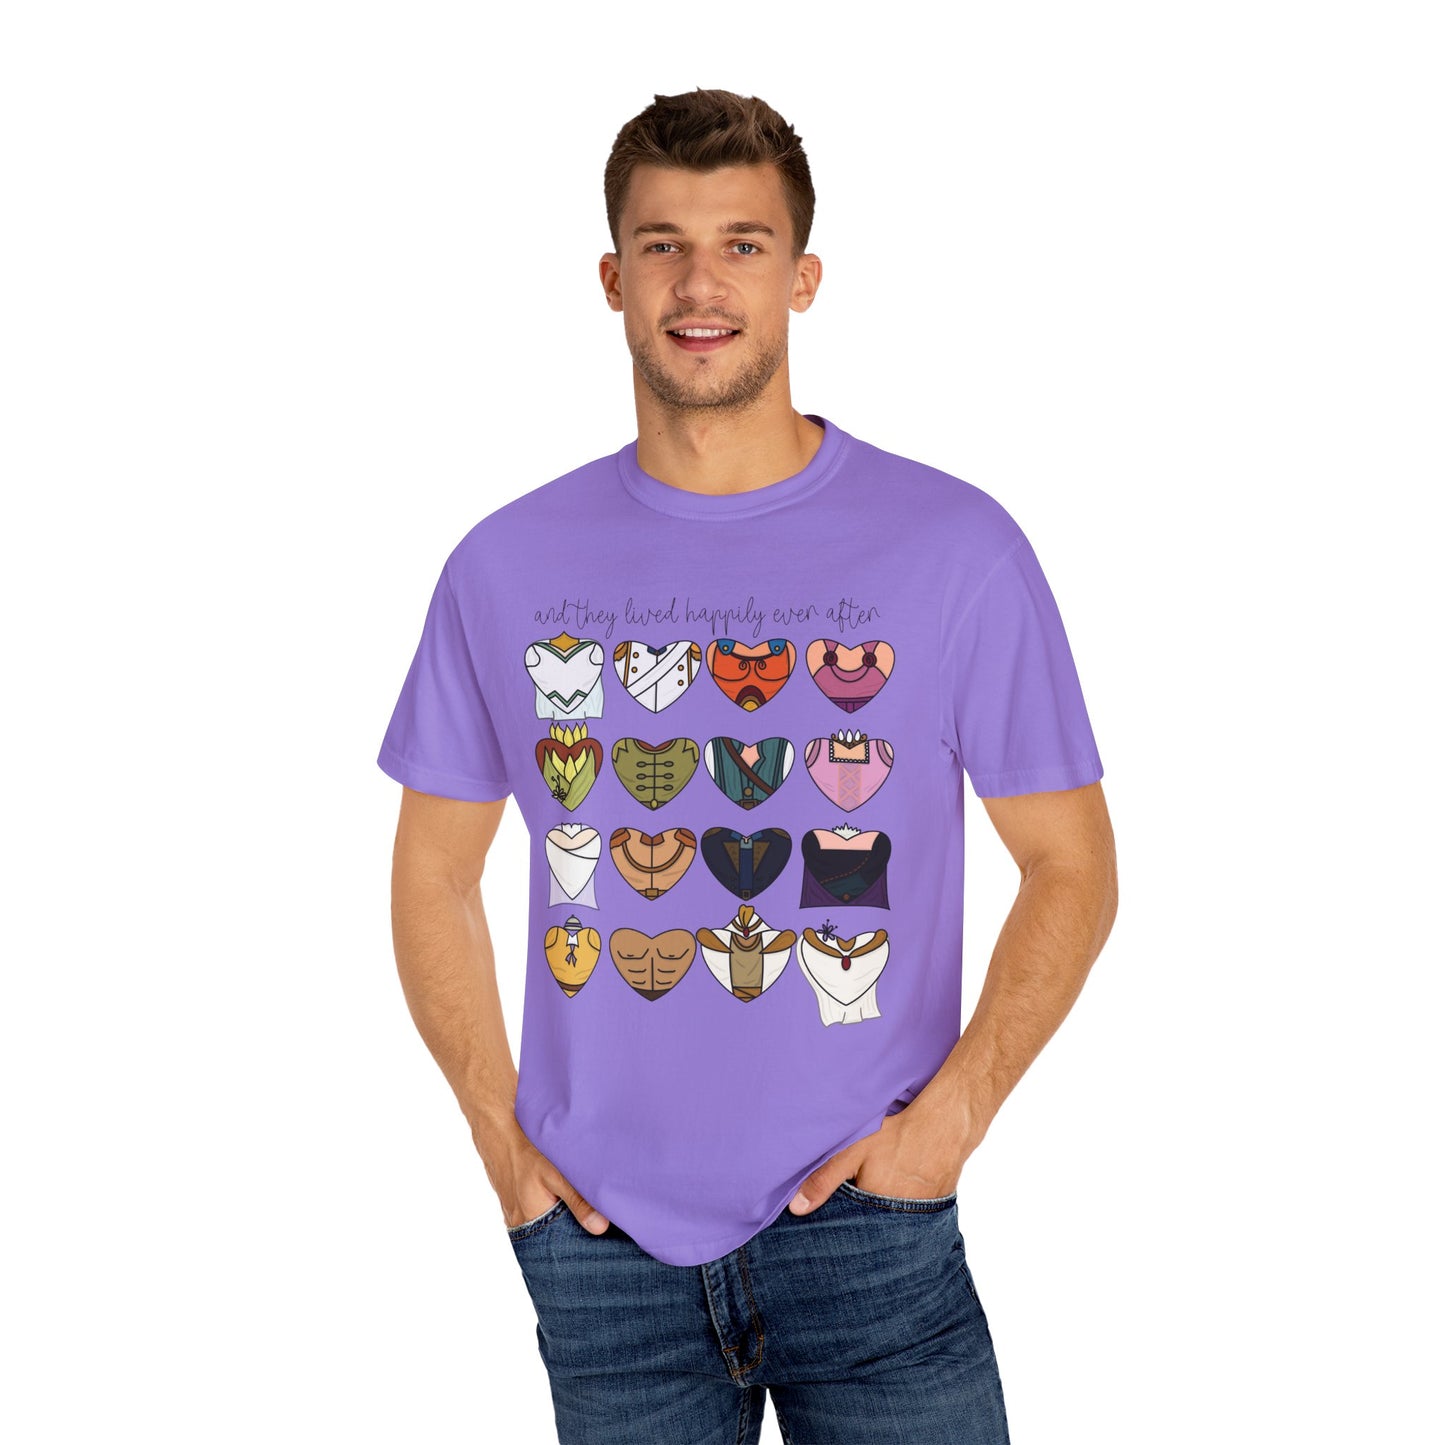 Adult Sweetheart Couples / Happily Ever After Tee